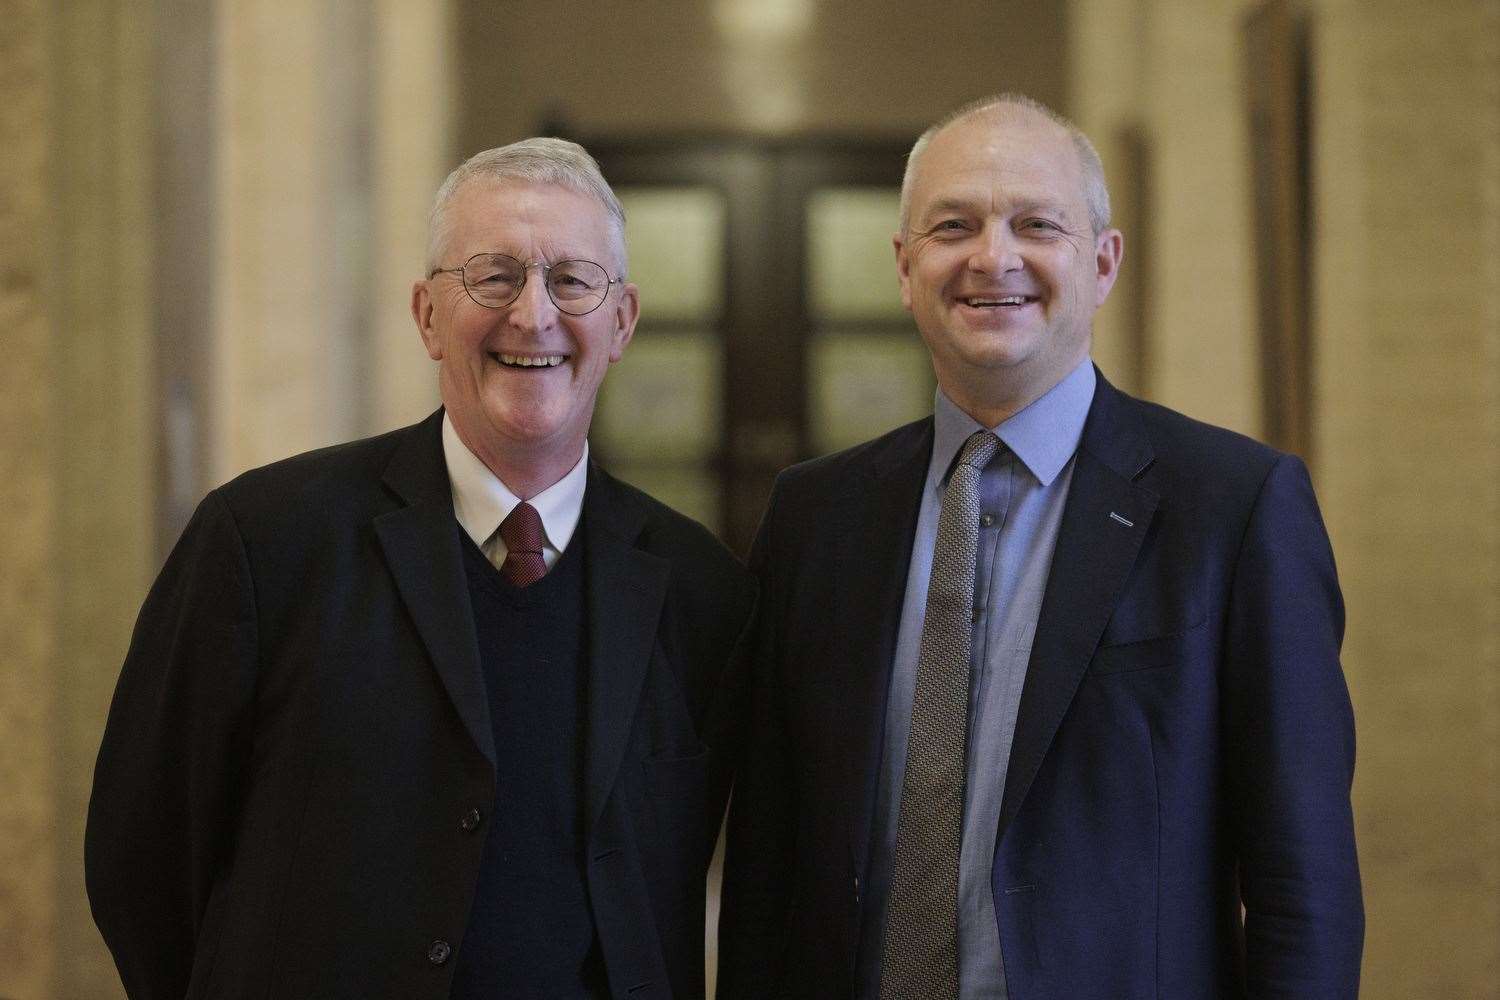 Shadow secretary of state for Northern Ireland Hilary Benn (left) alongside Conservative MP Jerome Mayhew at Parliament Buildings (Liam McBurney/PA)